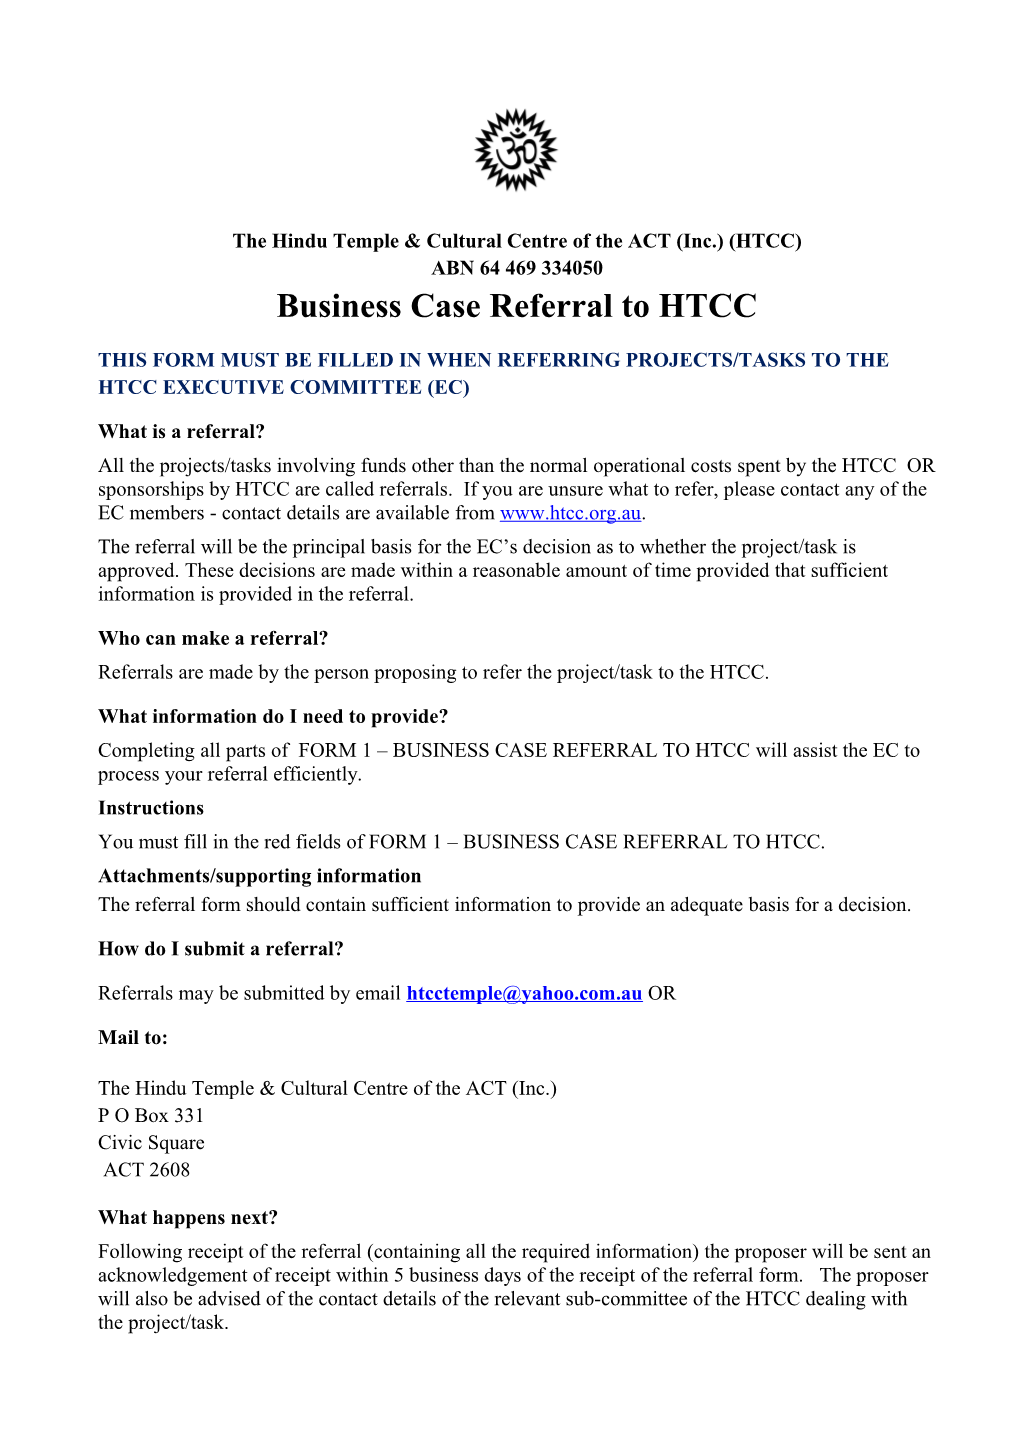 This Form Must Be Filled in When Referring Projects/Tasks to the Htcc Executive Committee (Ec)